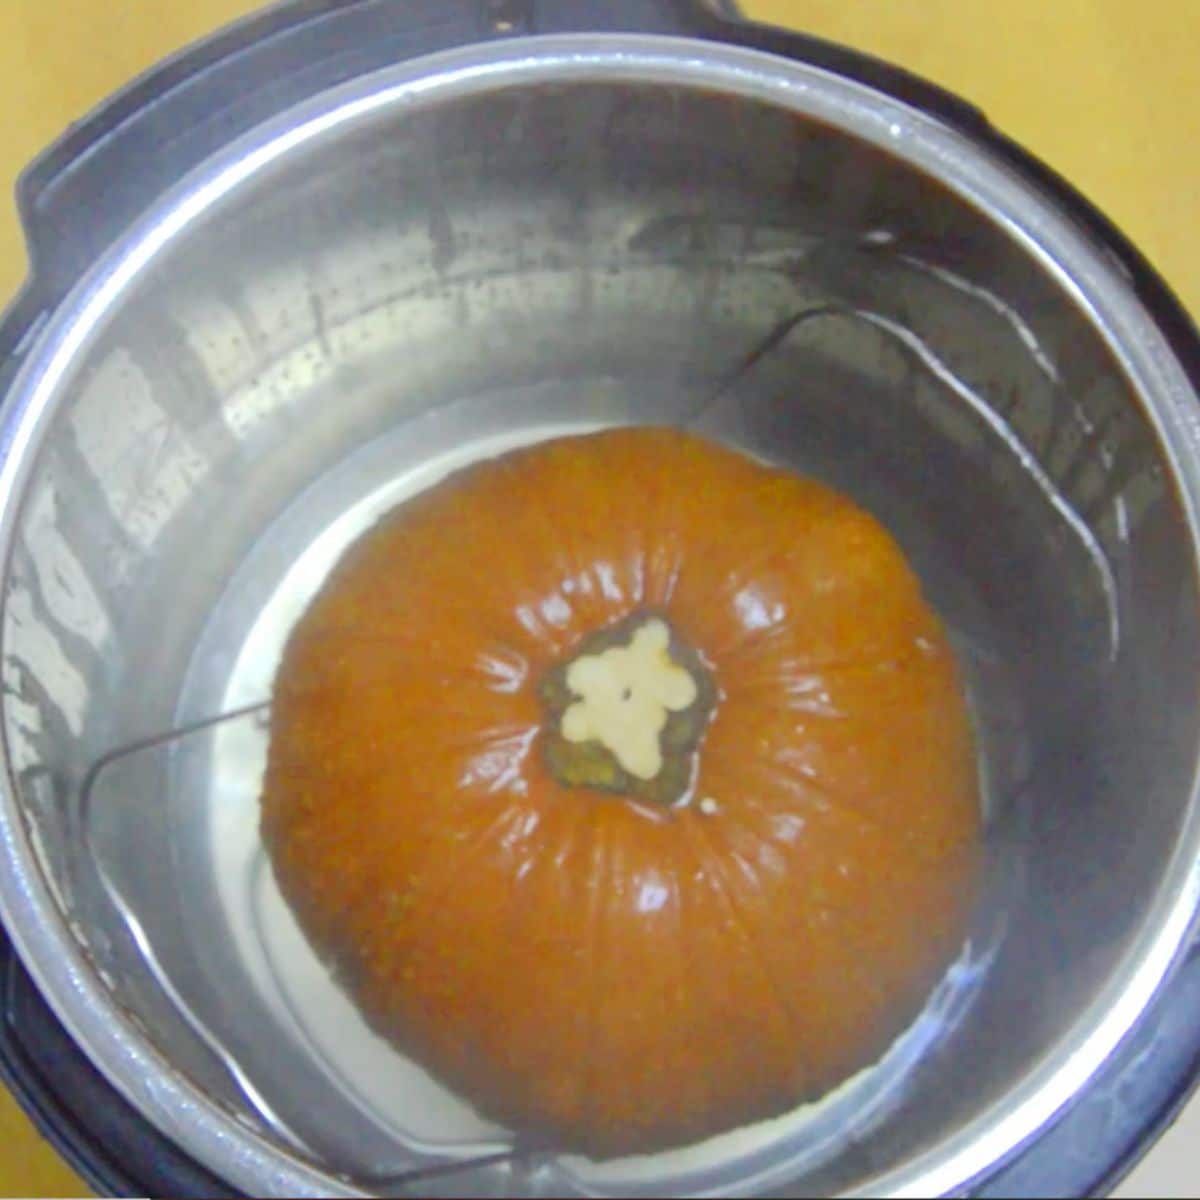 cooked whole pumpkin inside instant pot.